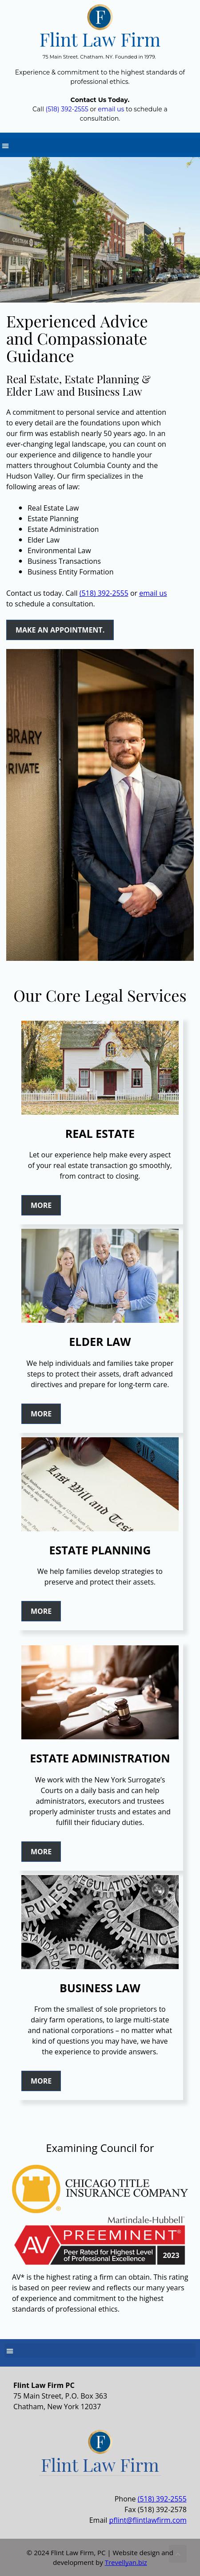 Flint Law Firm - Chatham NY Lawyers